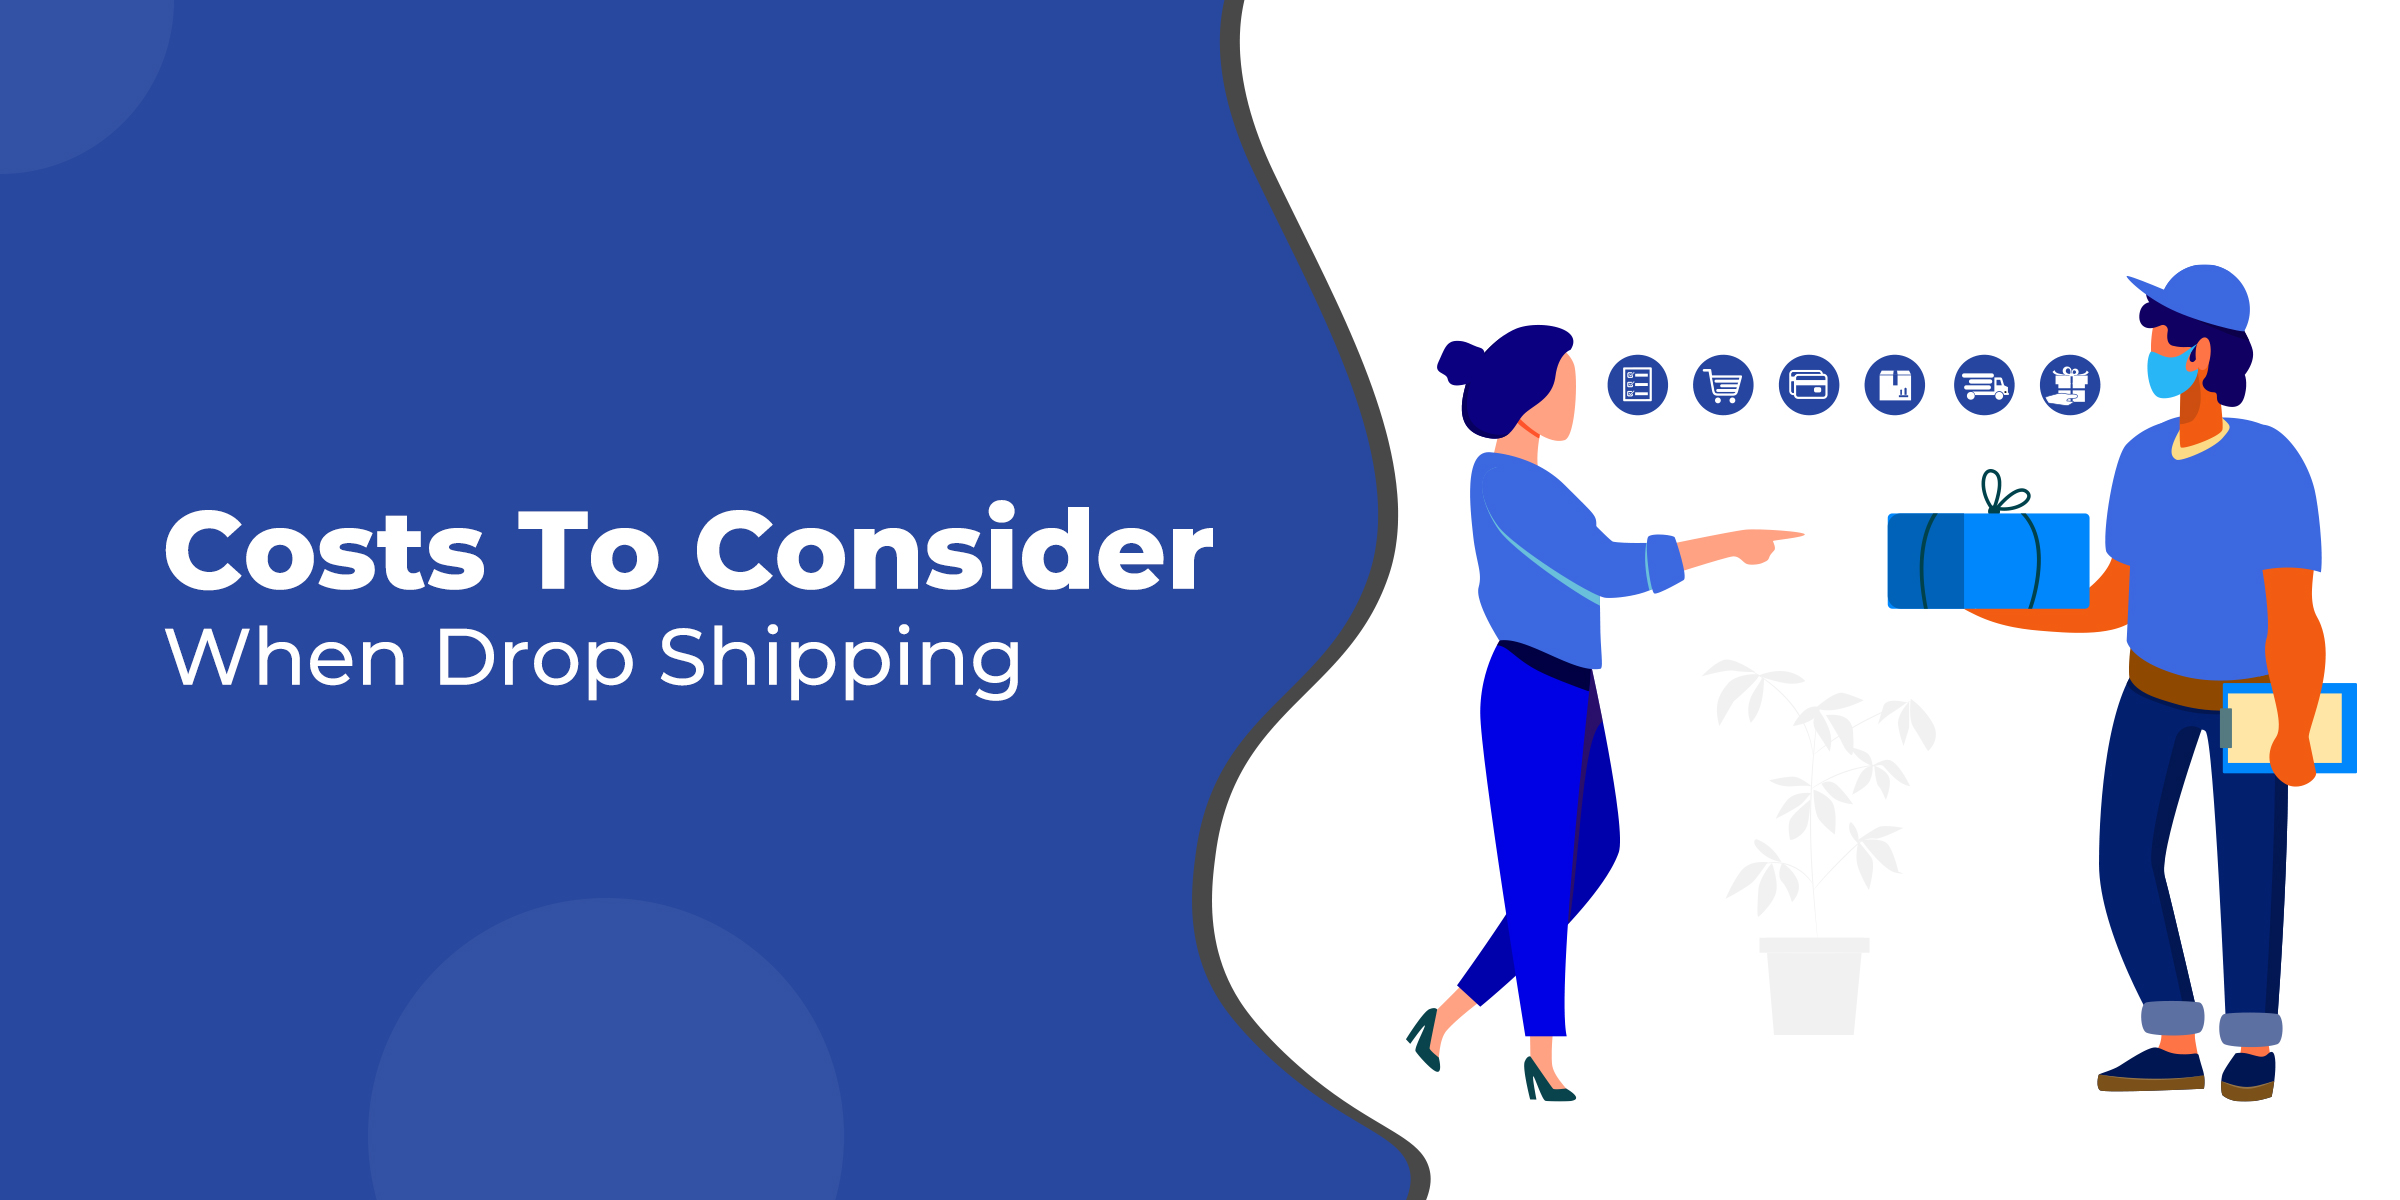 Costs To Consider When Drop Shipping